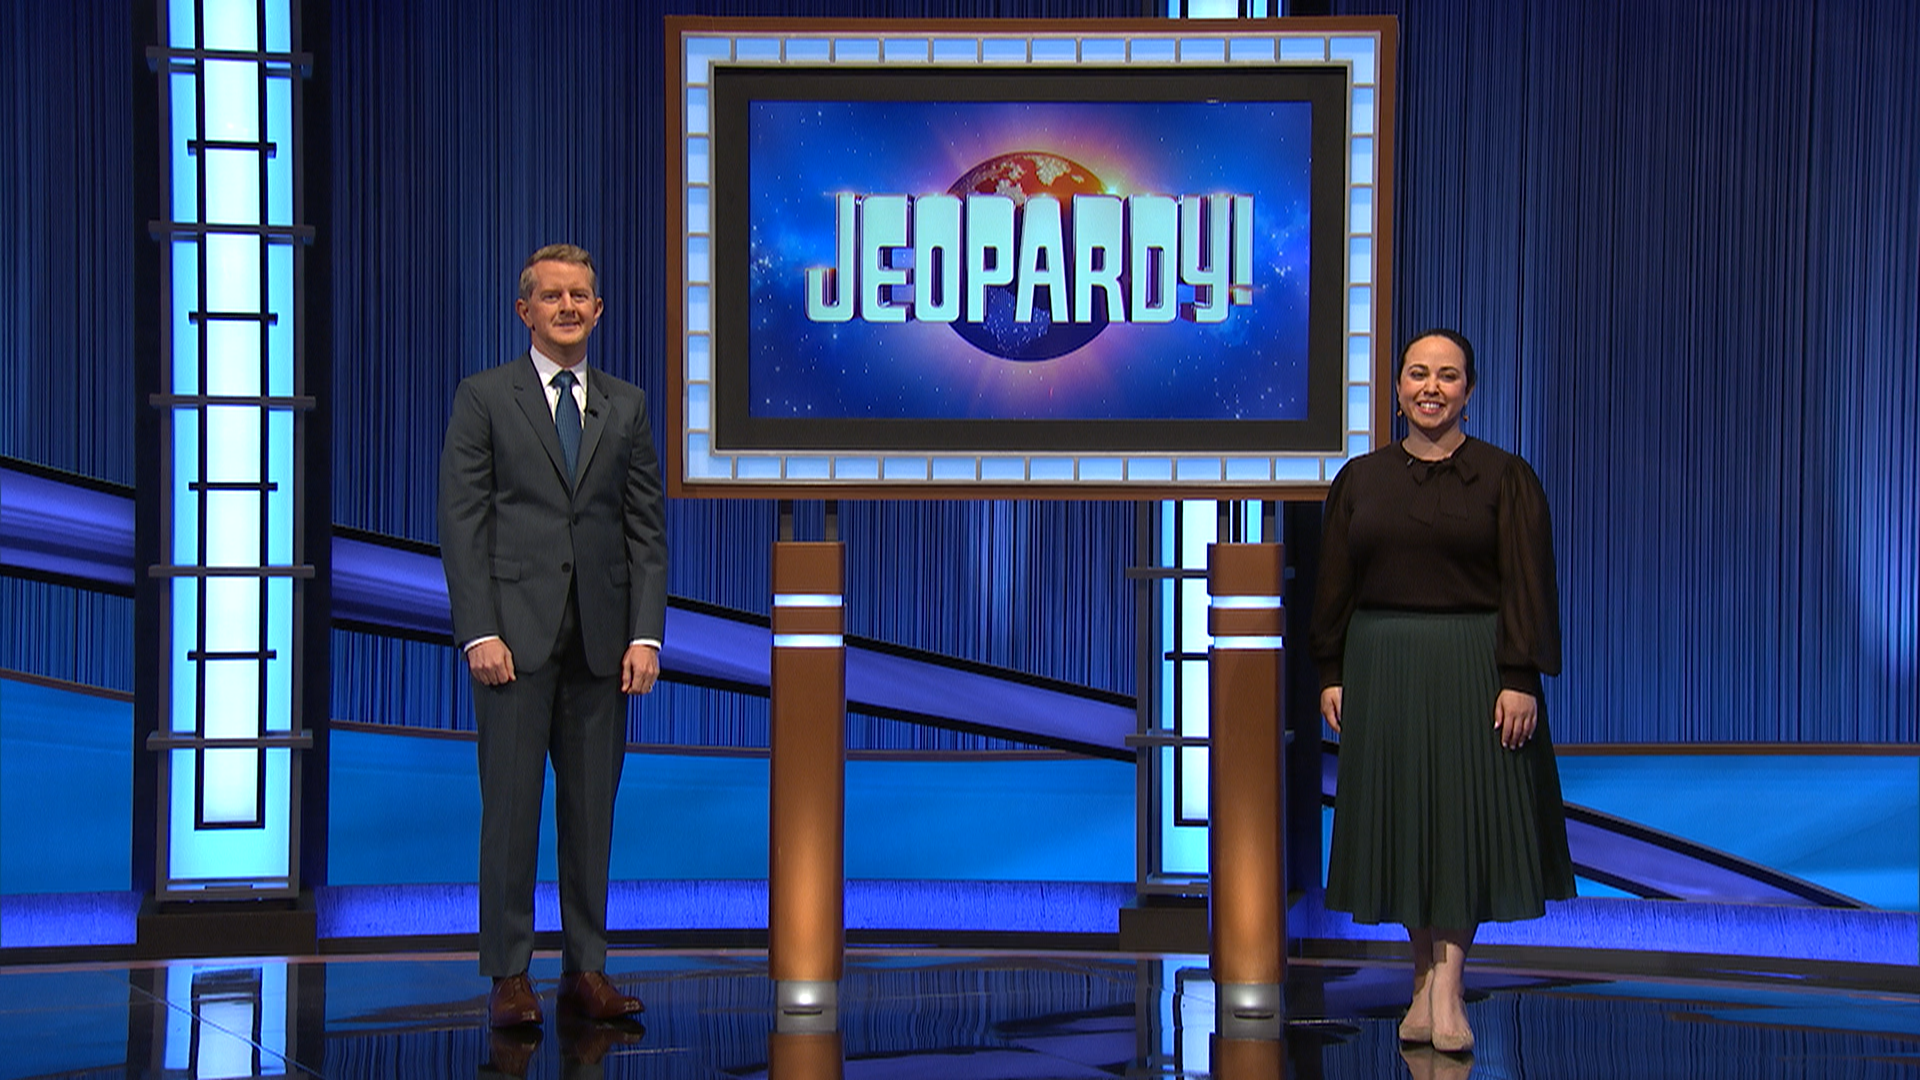 Jeopardy Taping Schedule 2022 I Lost To Amy Schneider On 'Jeopardy!' But Now I Want Her To Keep Winning |  Cognoscenti